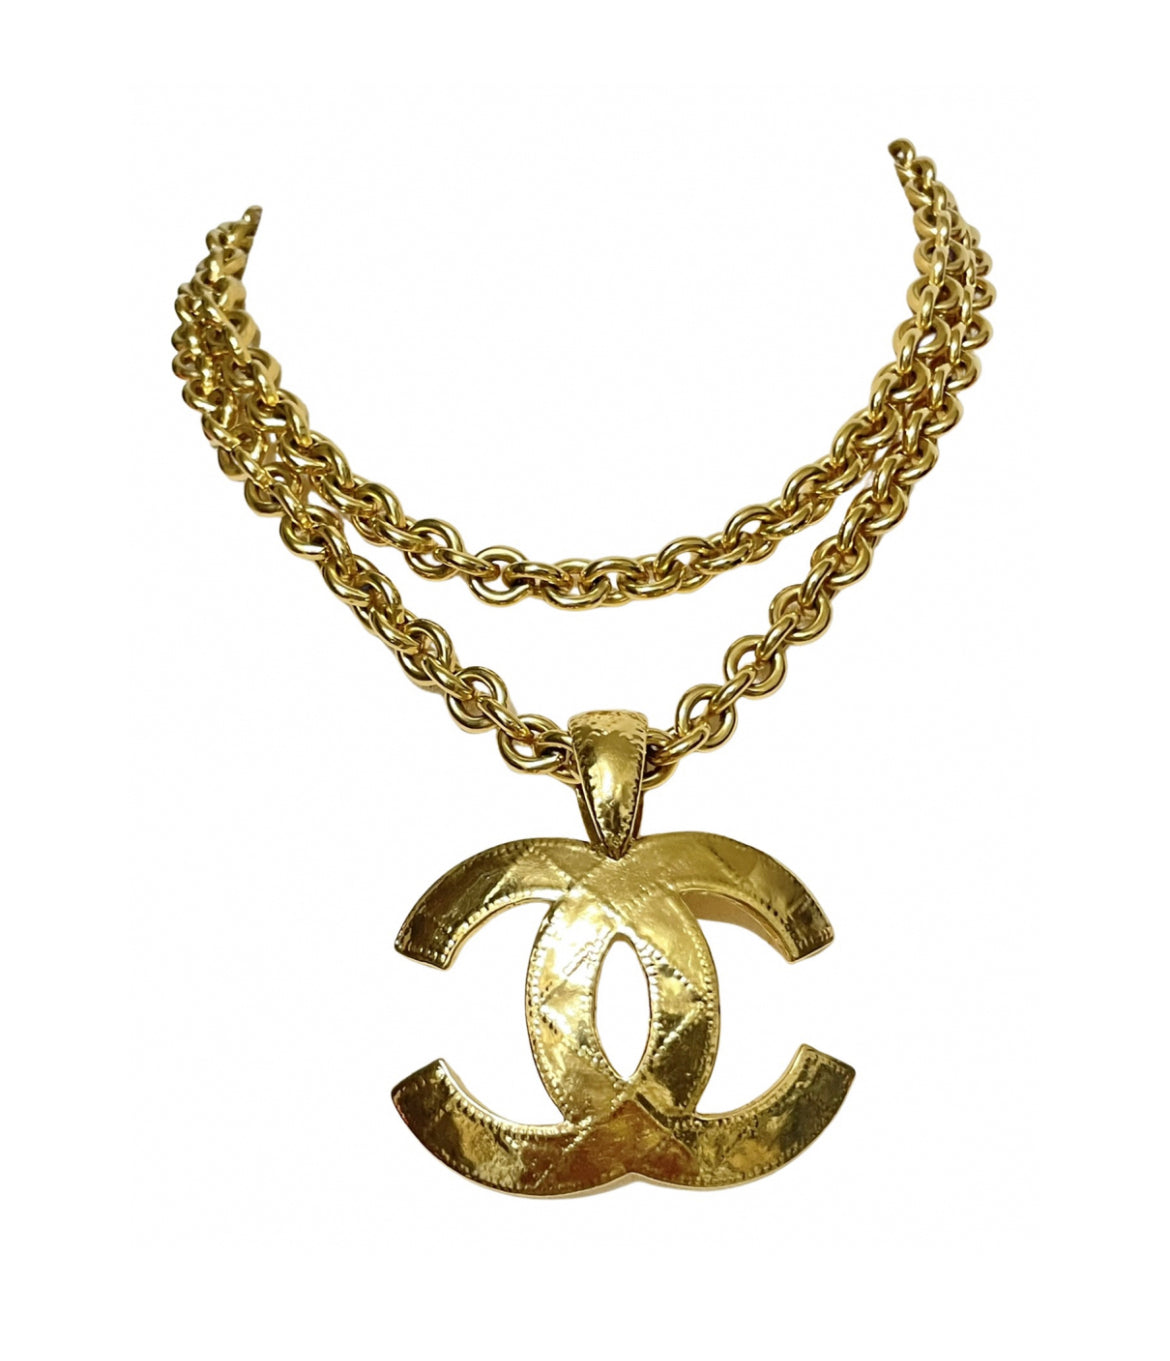 MINT. Vintage CHANEL golden chain necklace with large CC mark logo